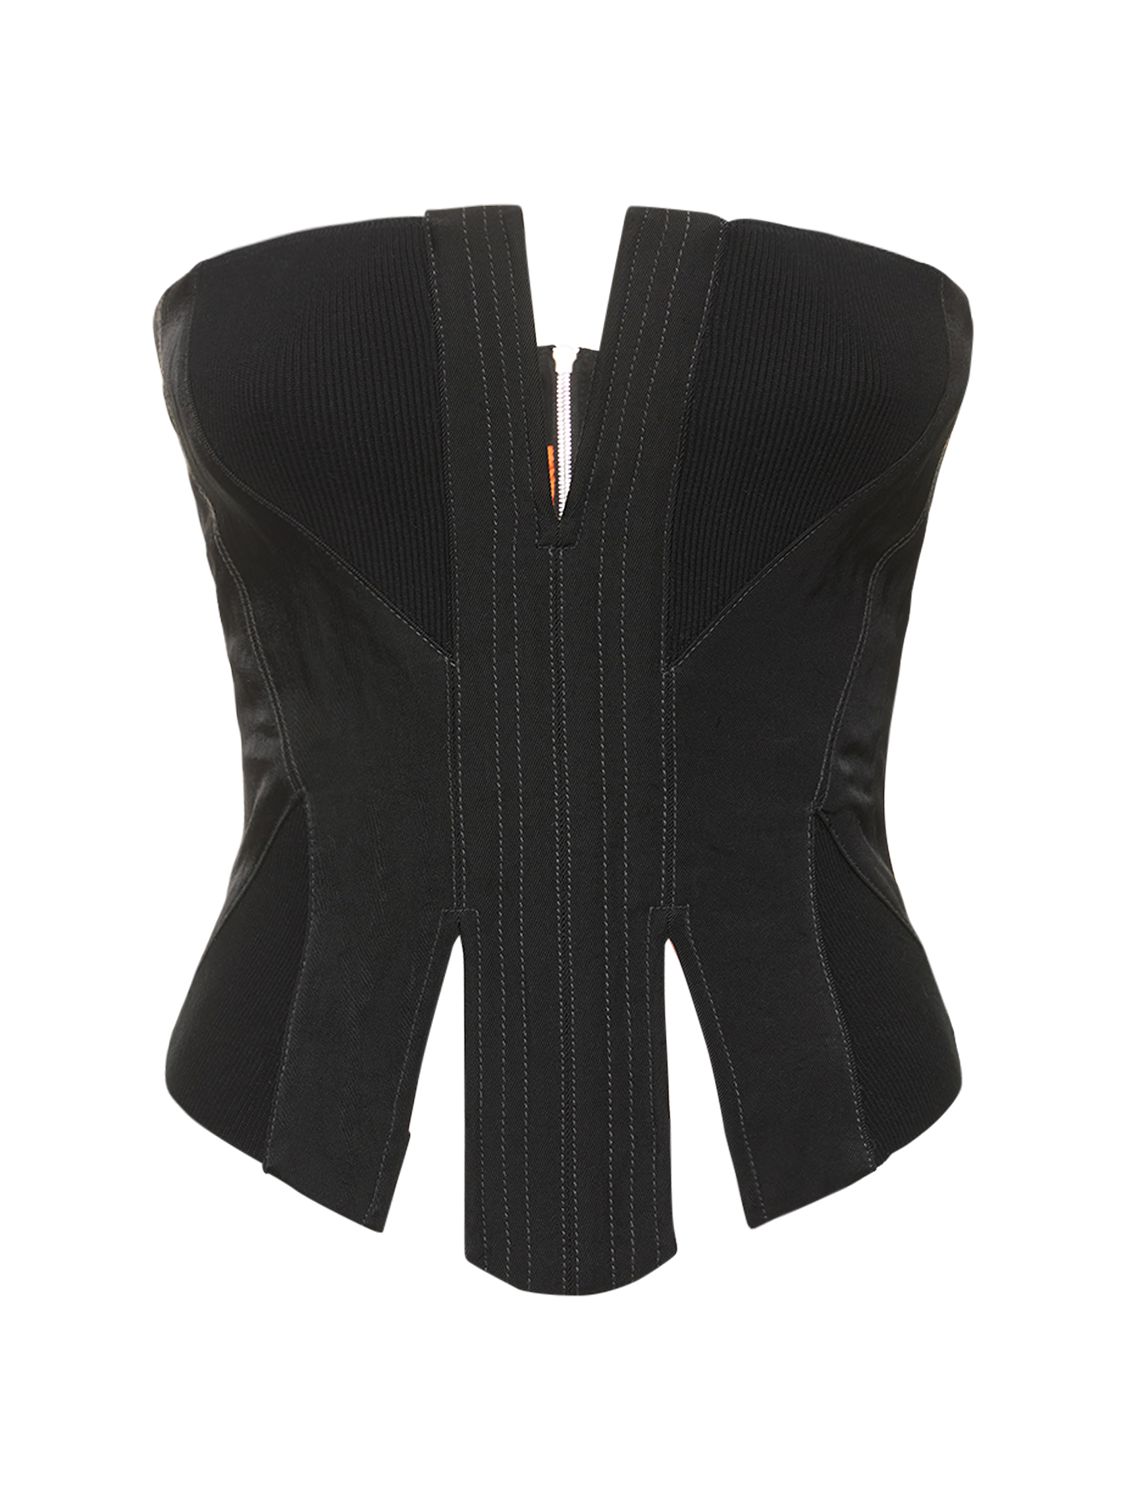 Dion Lee lace-up Boned Corset Top - Farfetch